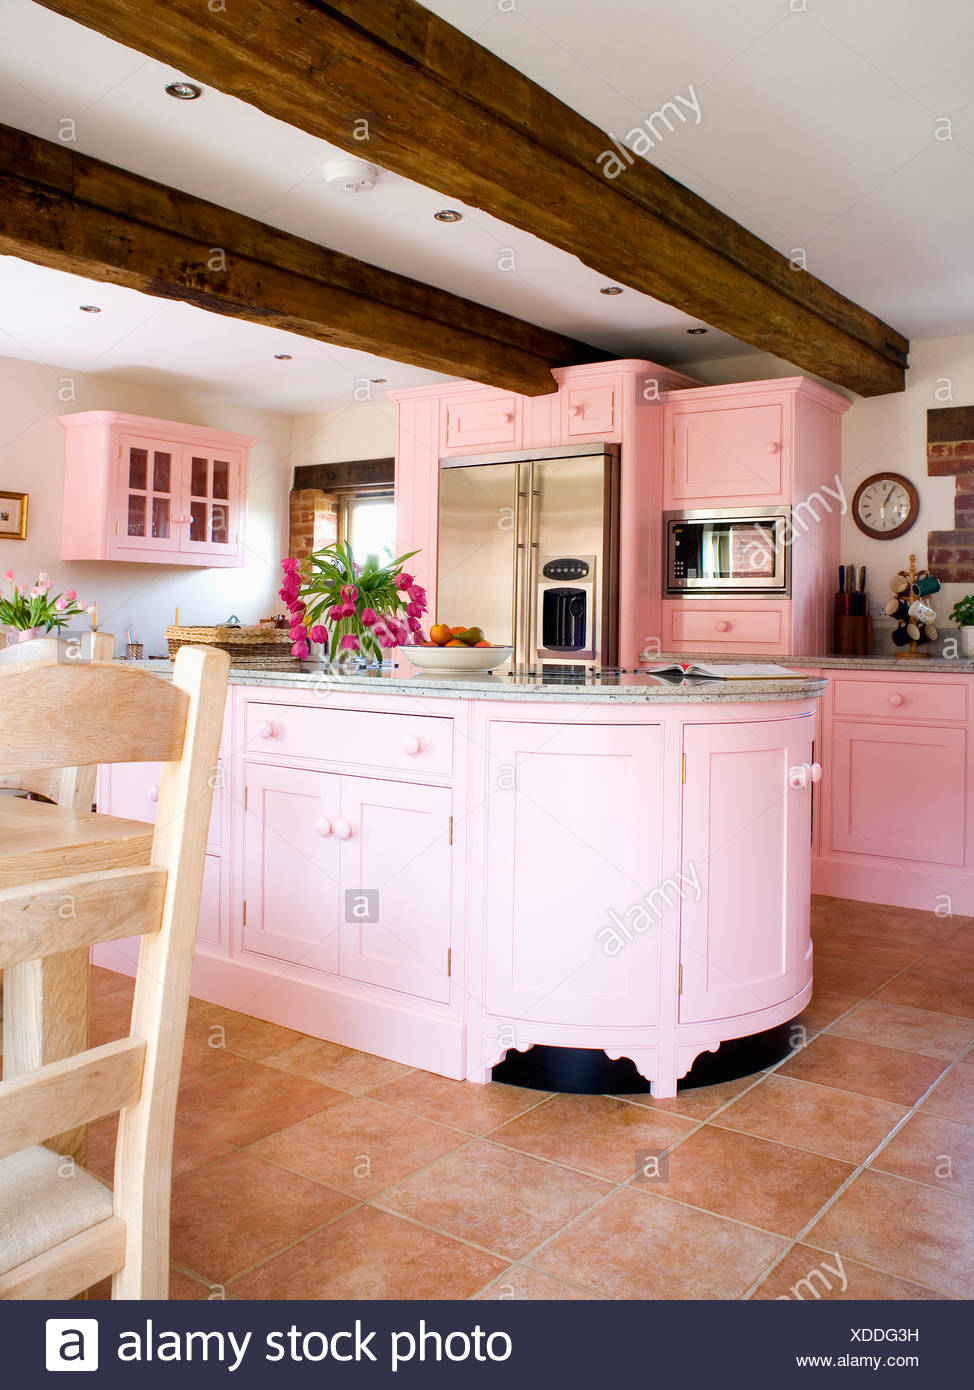 Pastel Pink Fitted Units And Beamed Ceiling In Country Kitchen With Terracotta Floor Tiles Stock Photo Alamy